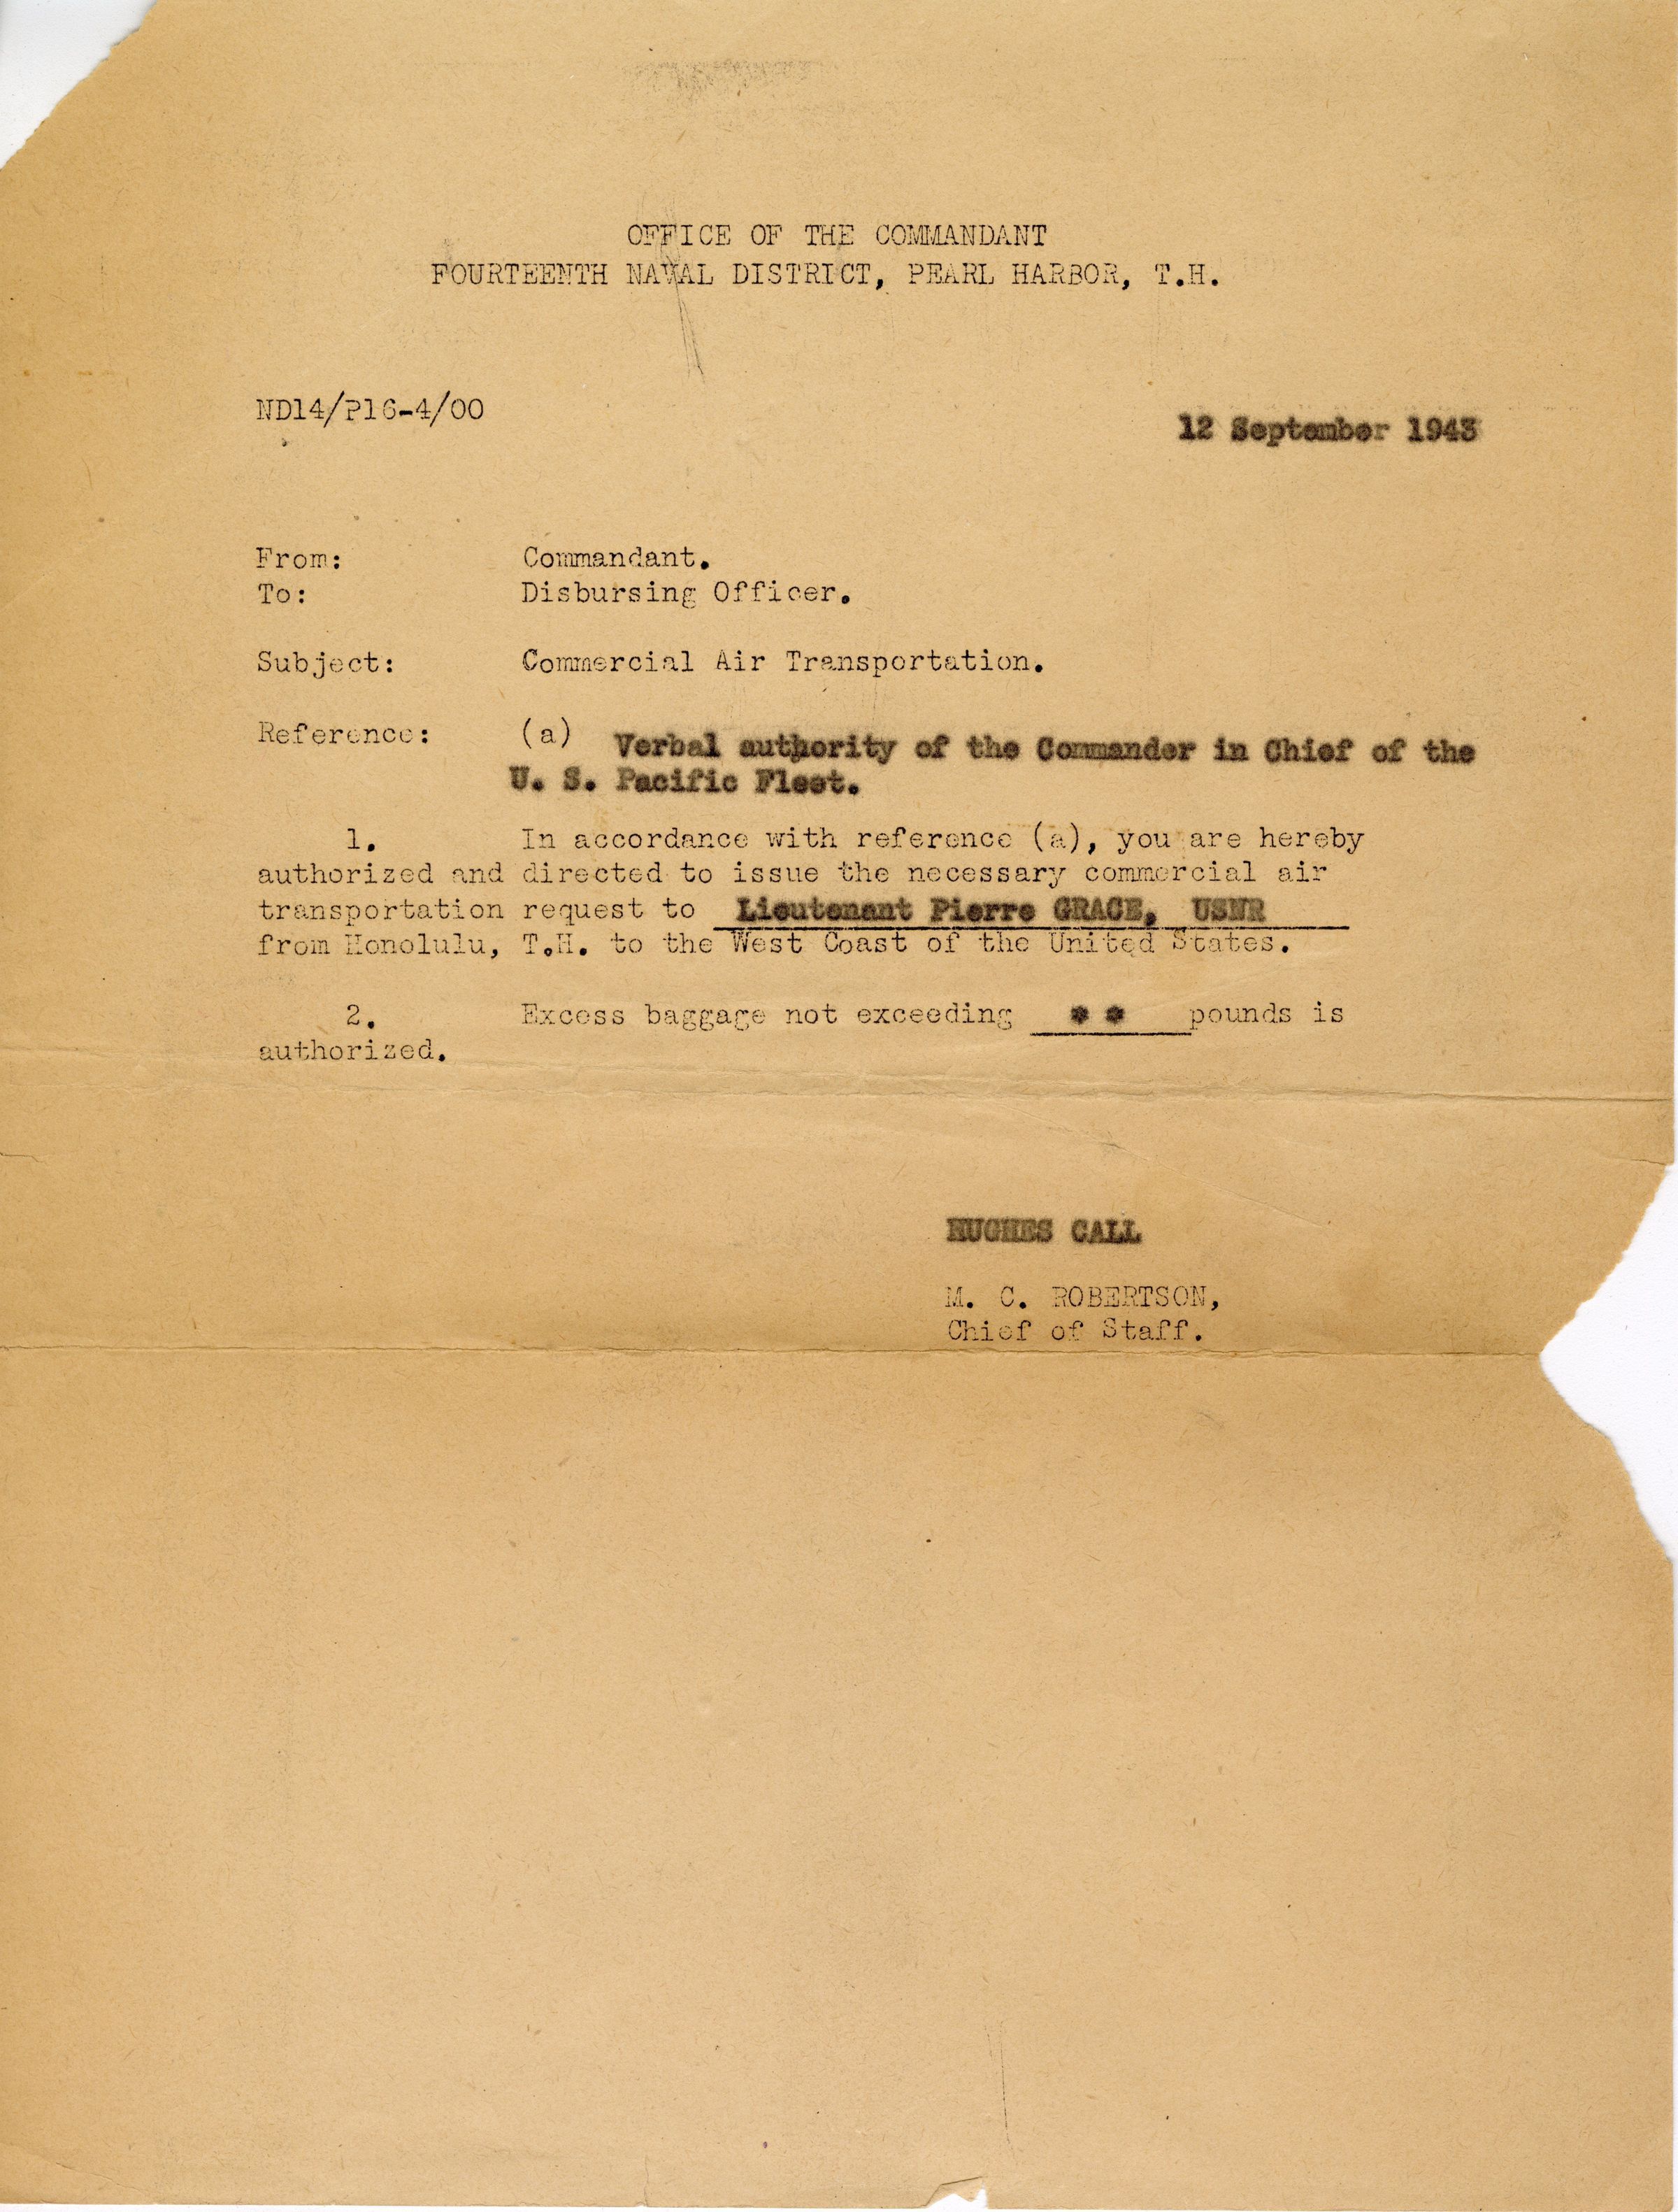 Primary Image of The Letter Authorizing Pierre Grace to Obtain Civilian Transportation from Hawaii to the United States